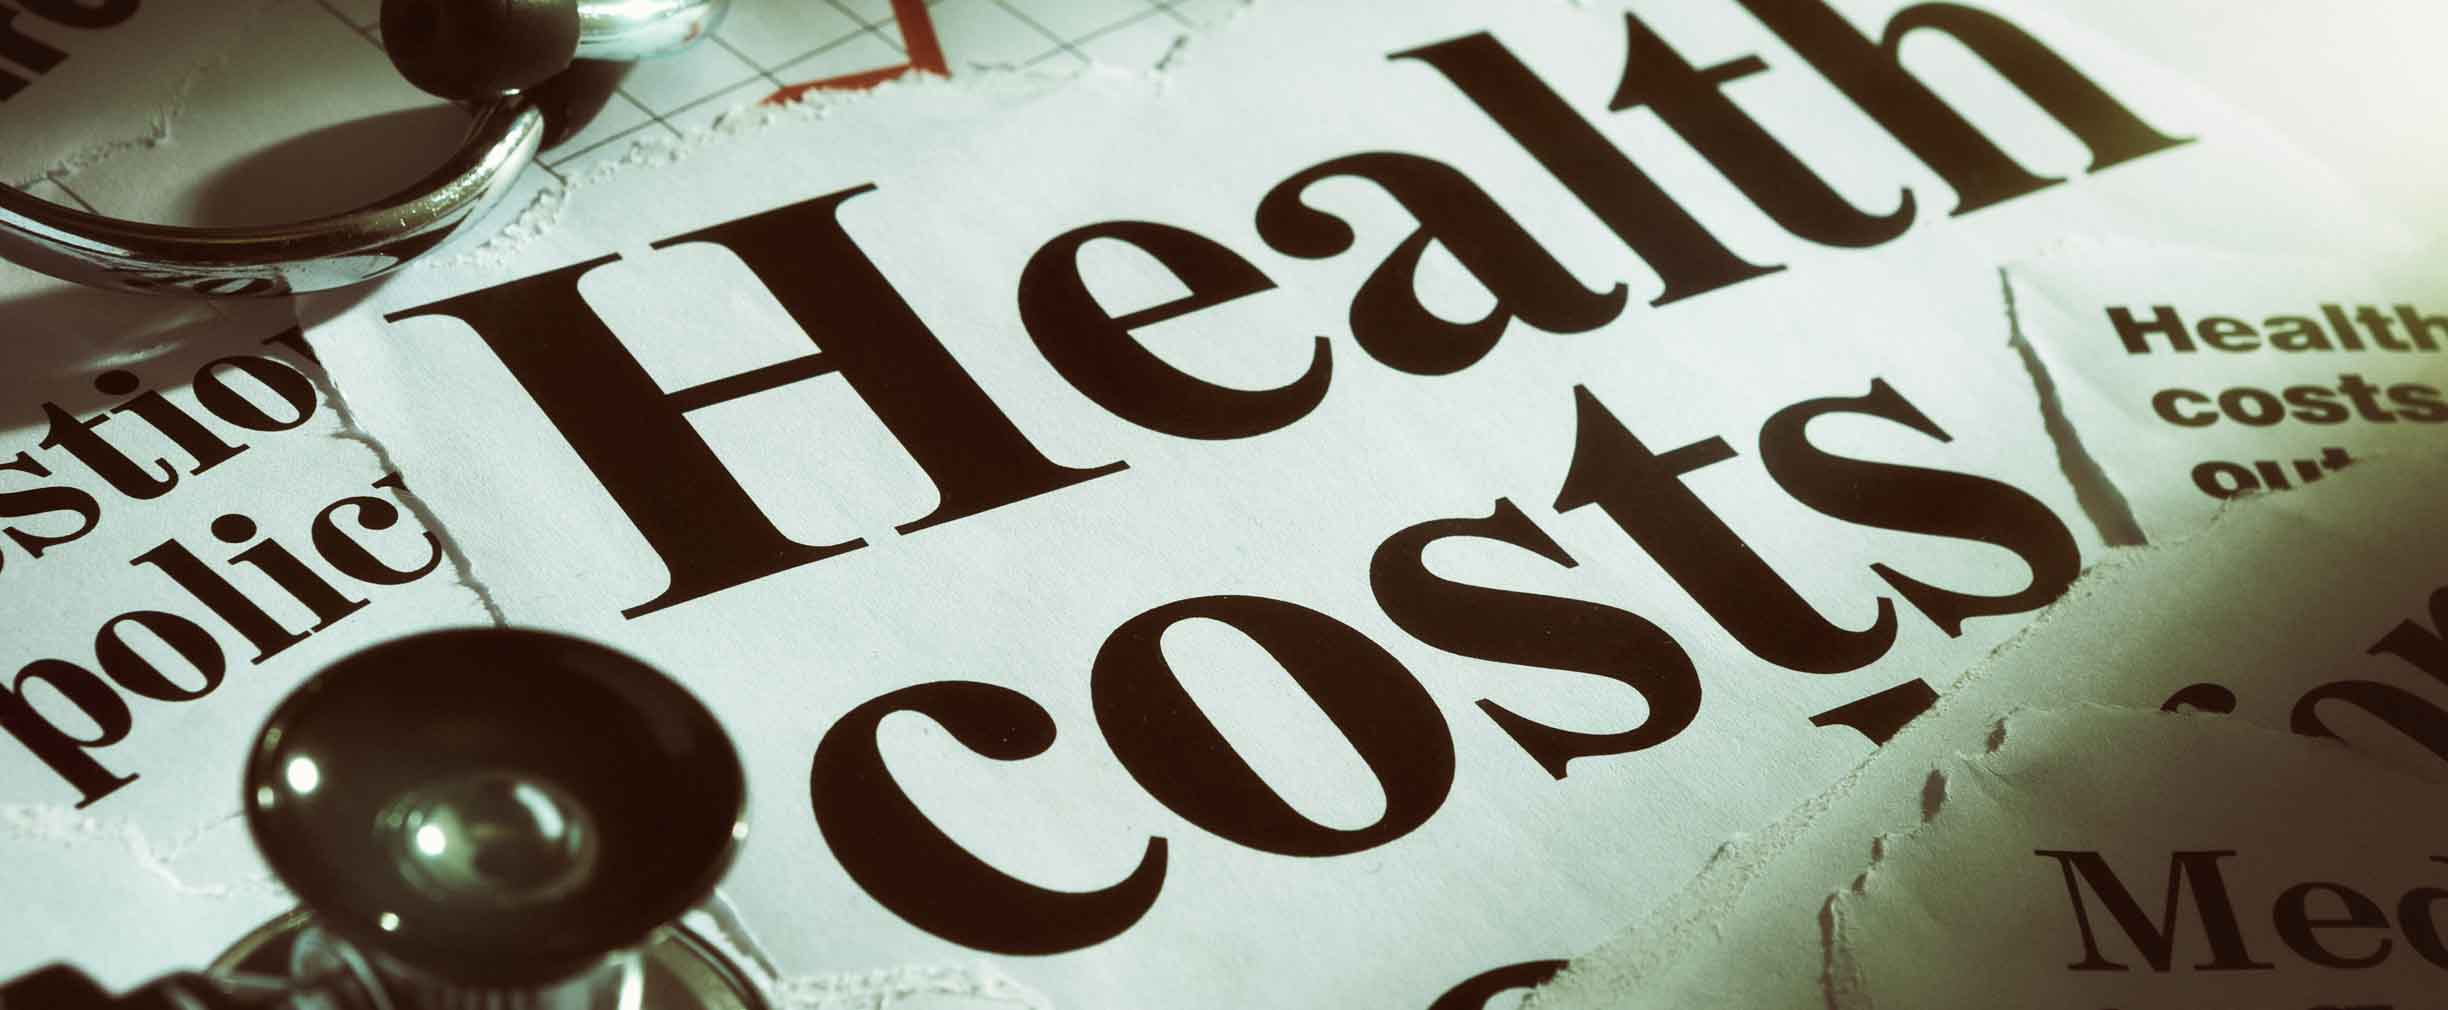 health insurance costs